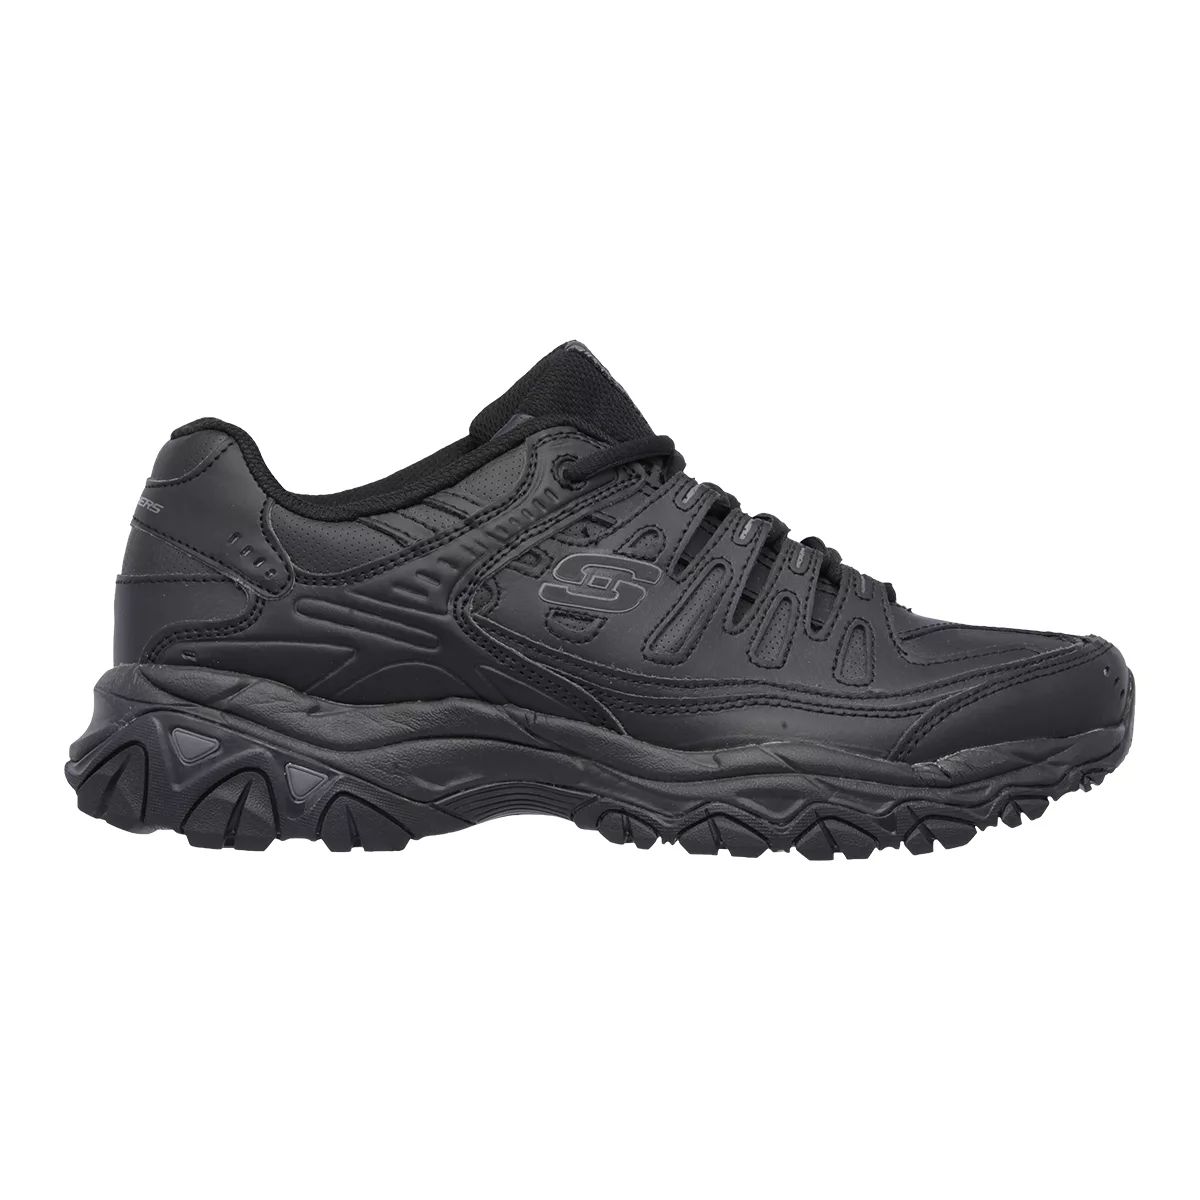 Skechers Men's Afterburn Memory Fit Shoes, Wide Width, Walking, Cushioned,  Leather